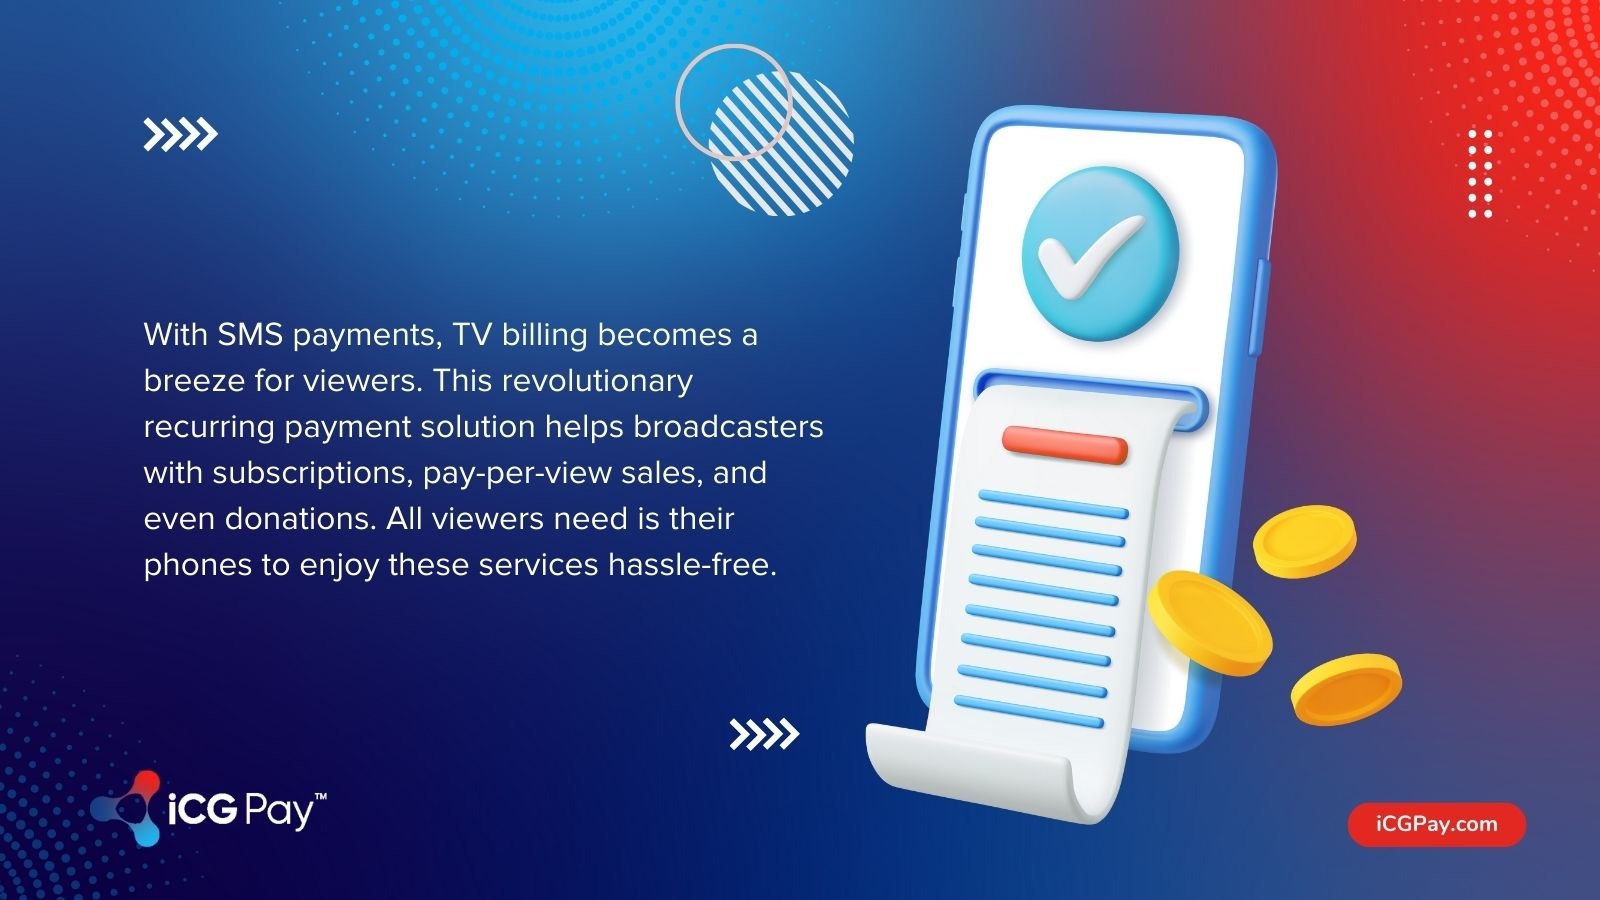 SMS payments for TV billing